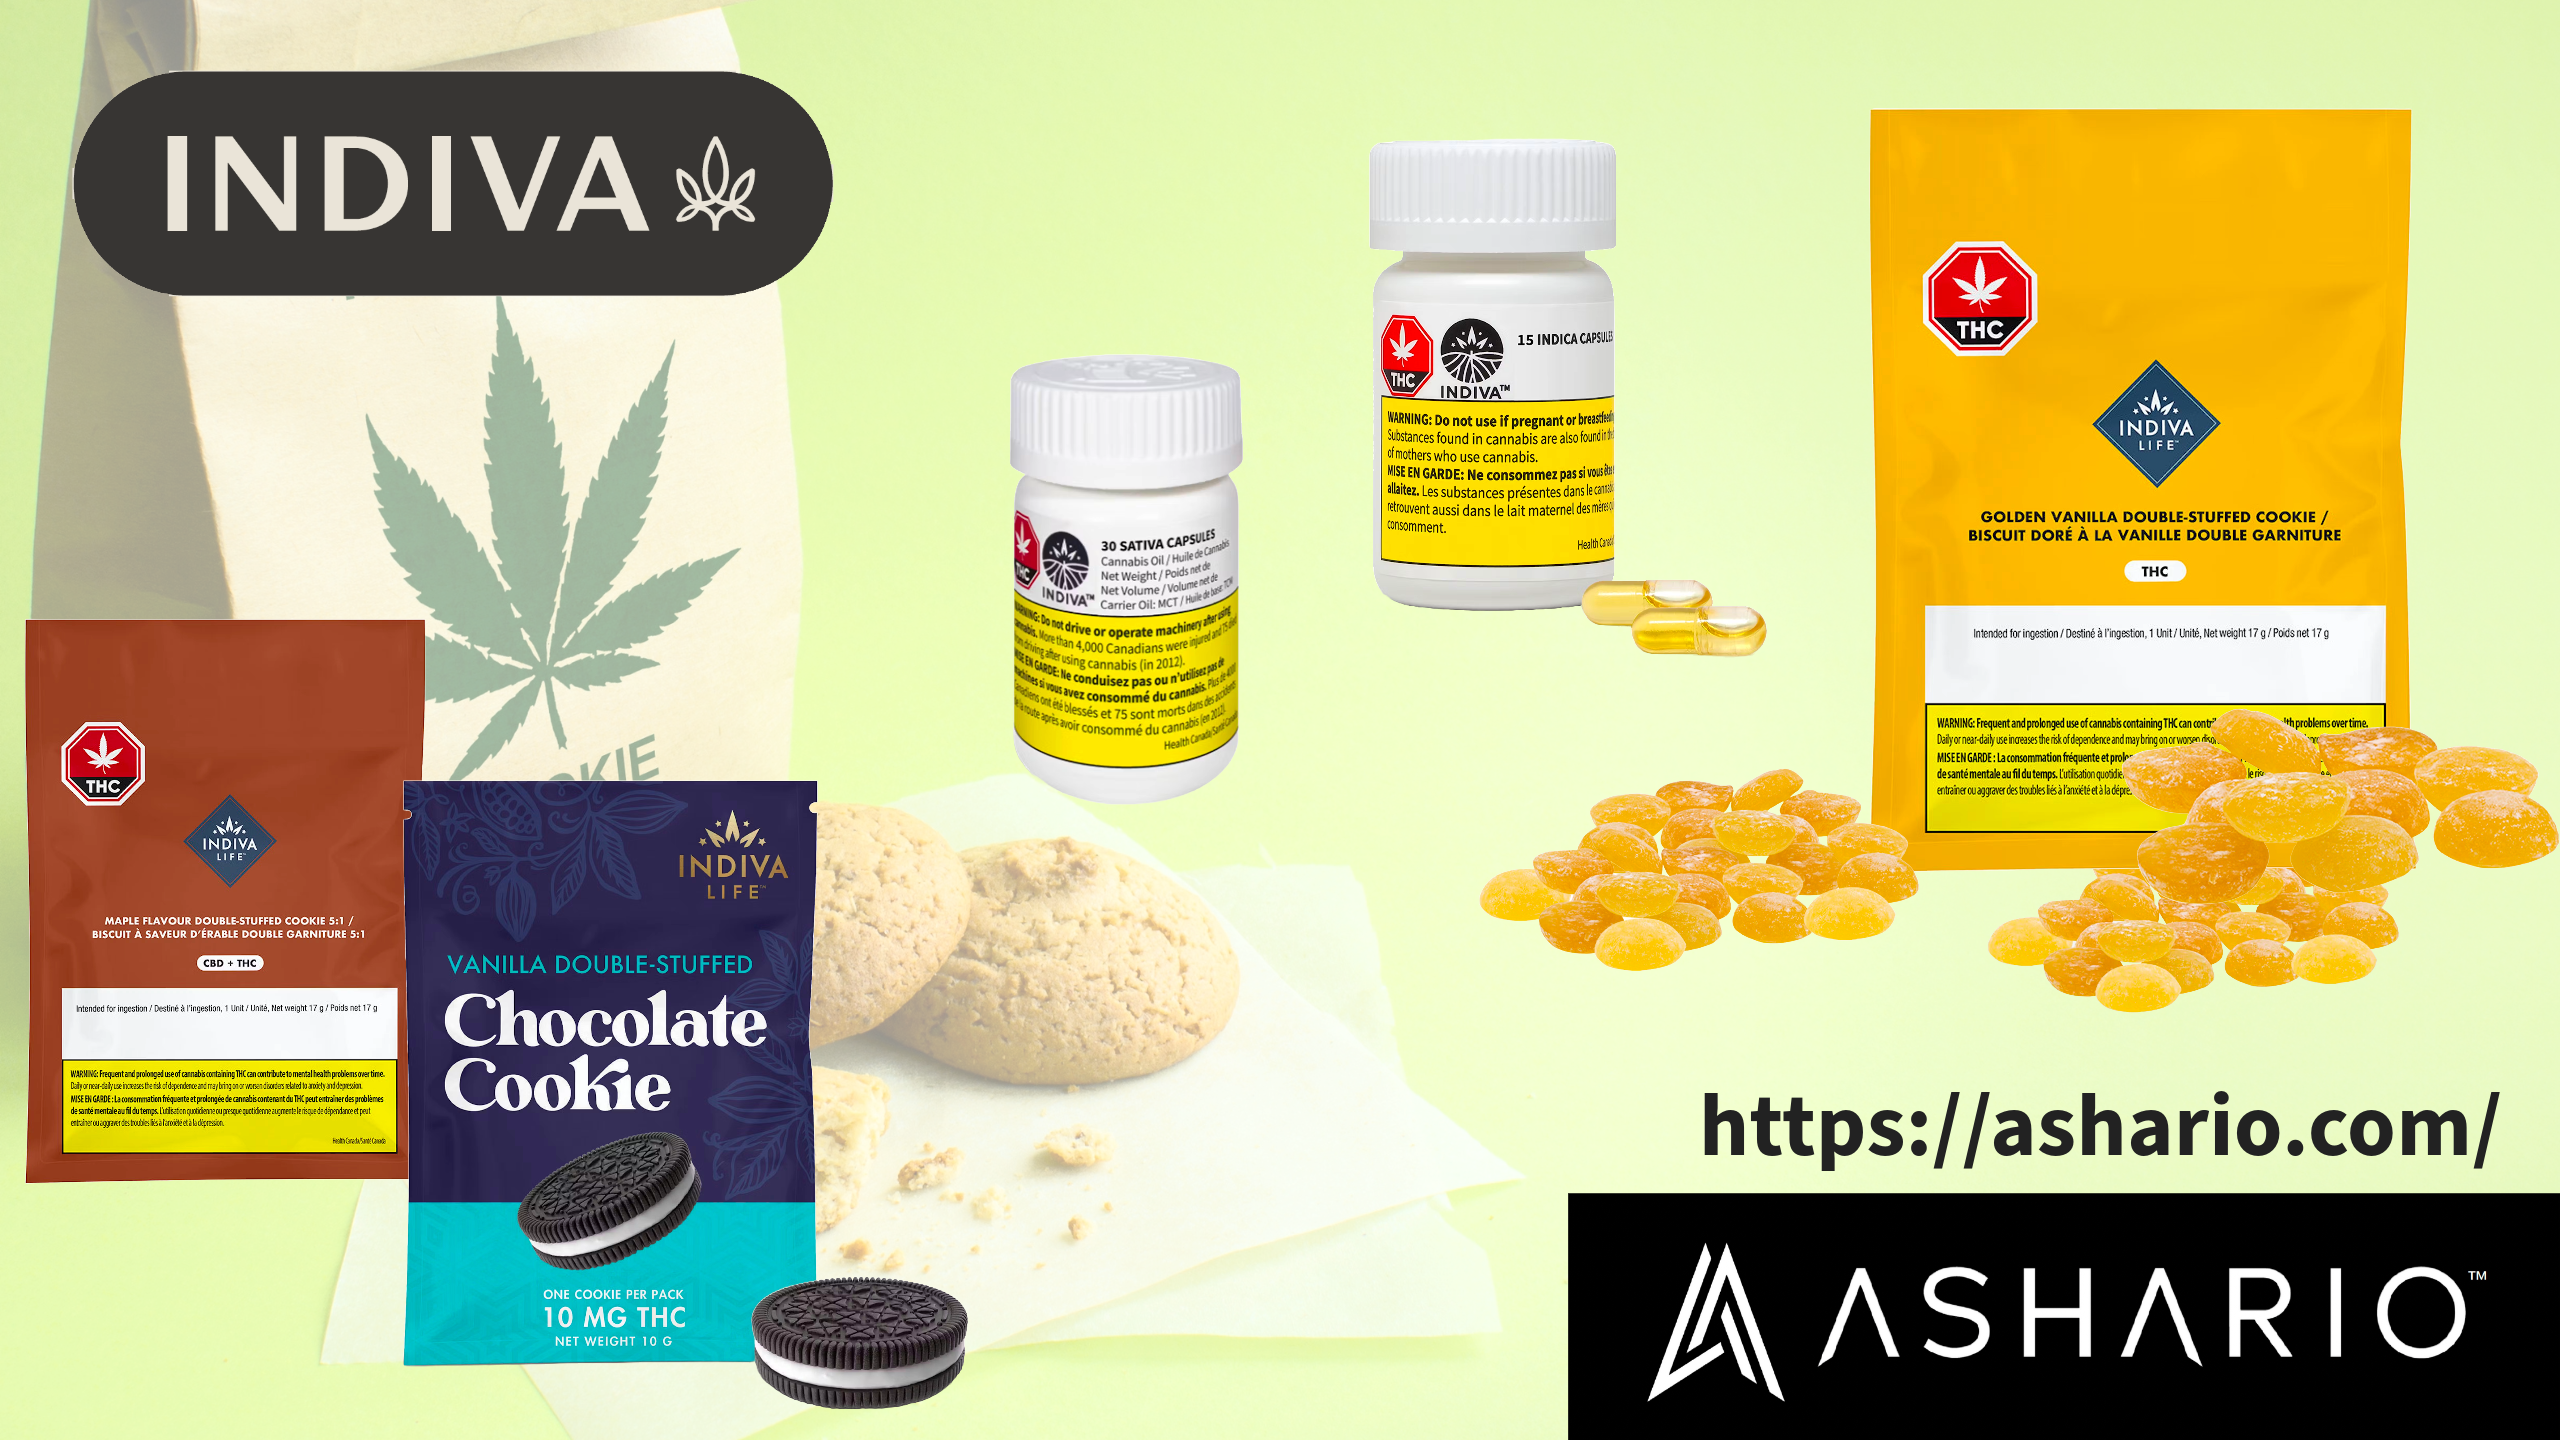 Looking for the strongest legal edibles in Canada? Indiva Life Lozenges are your answer! 